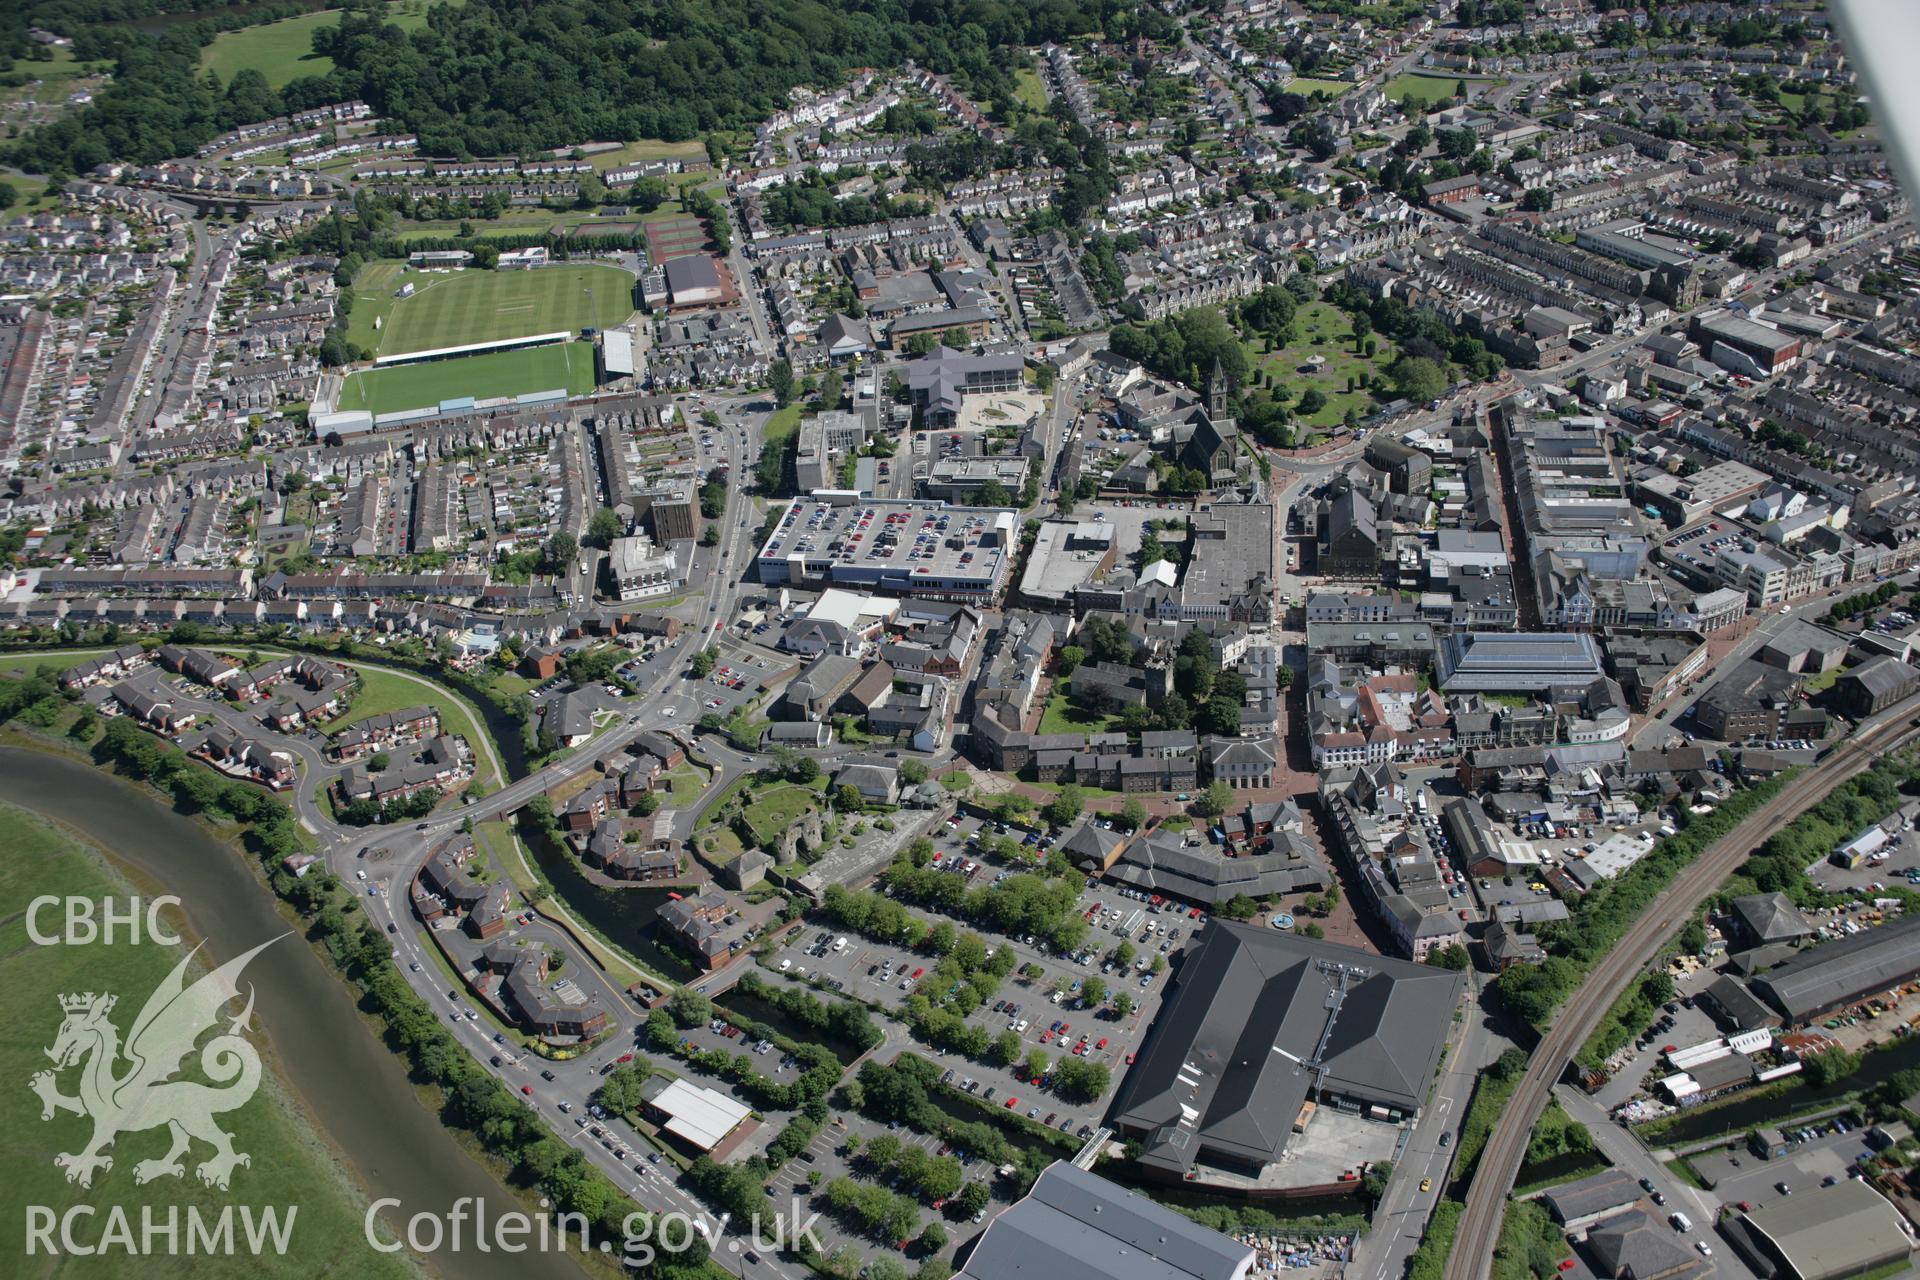 RCAHMW colour oblique aerial photograph of Neath Castle and town, viewed from the north-west. Taken on 22 June 2005 by Toby Driver